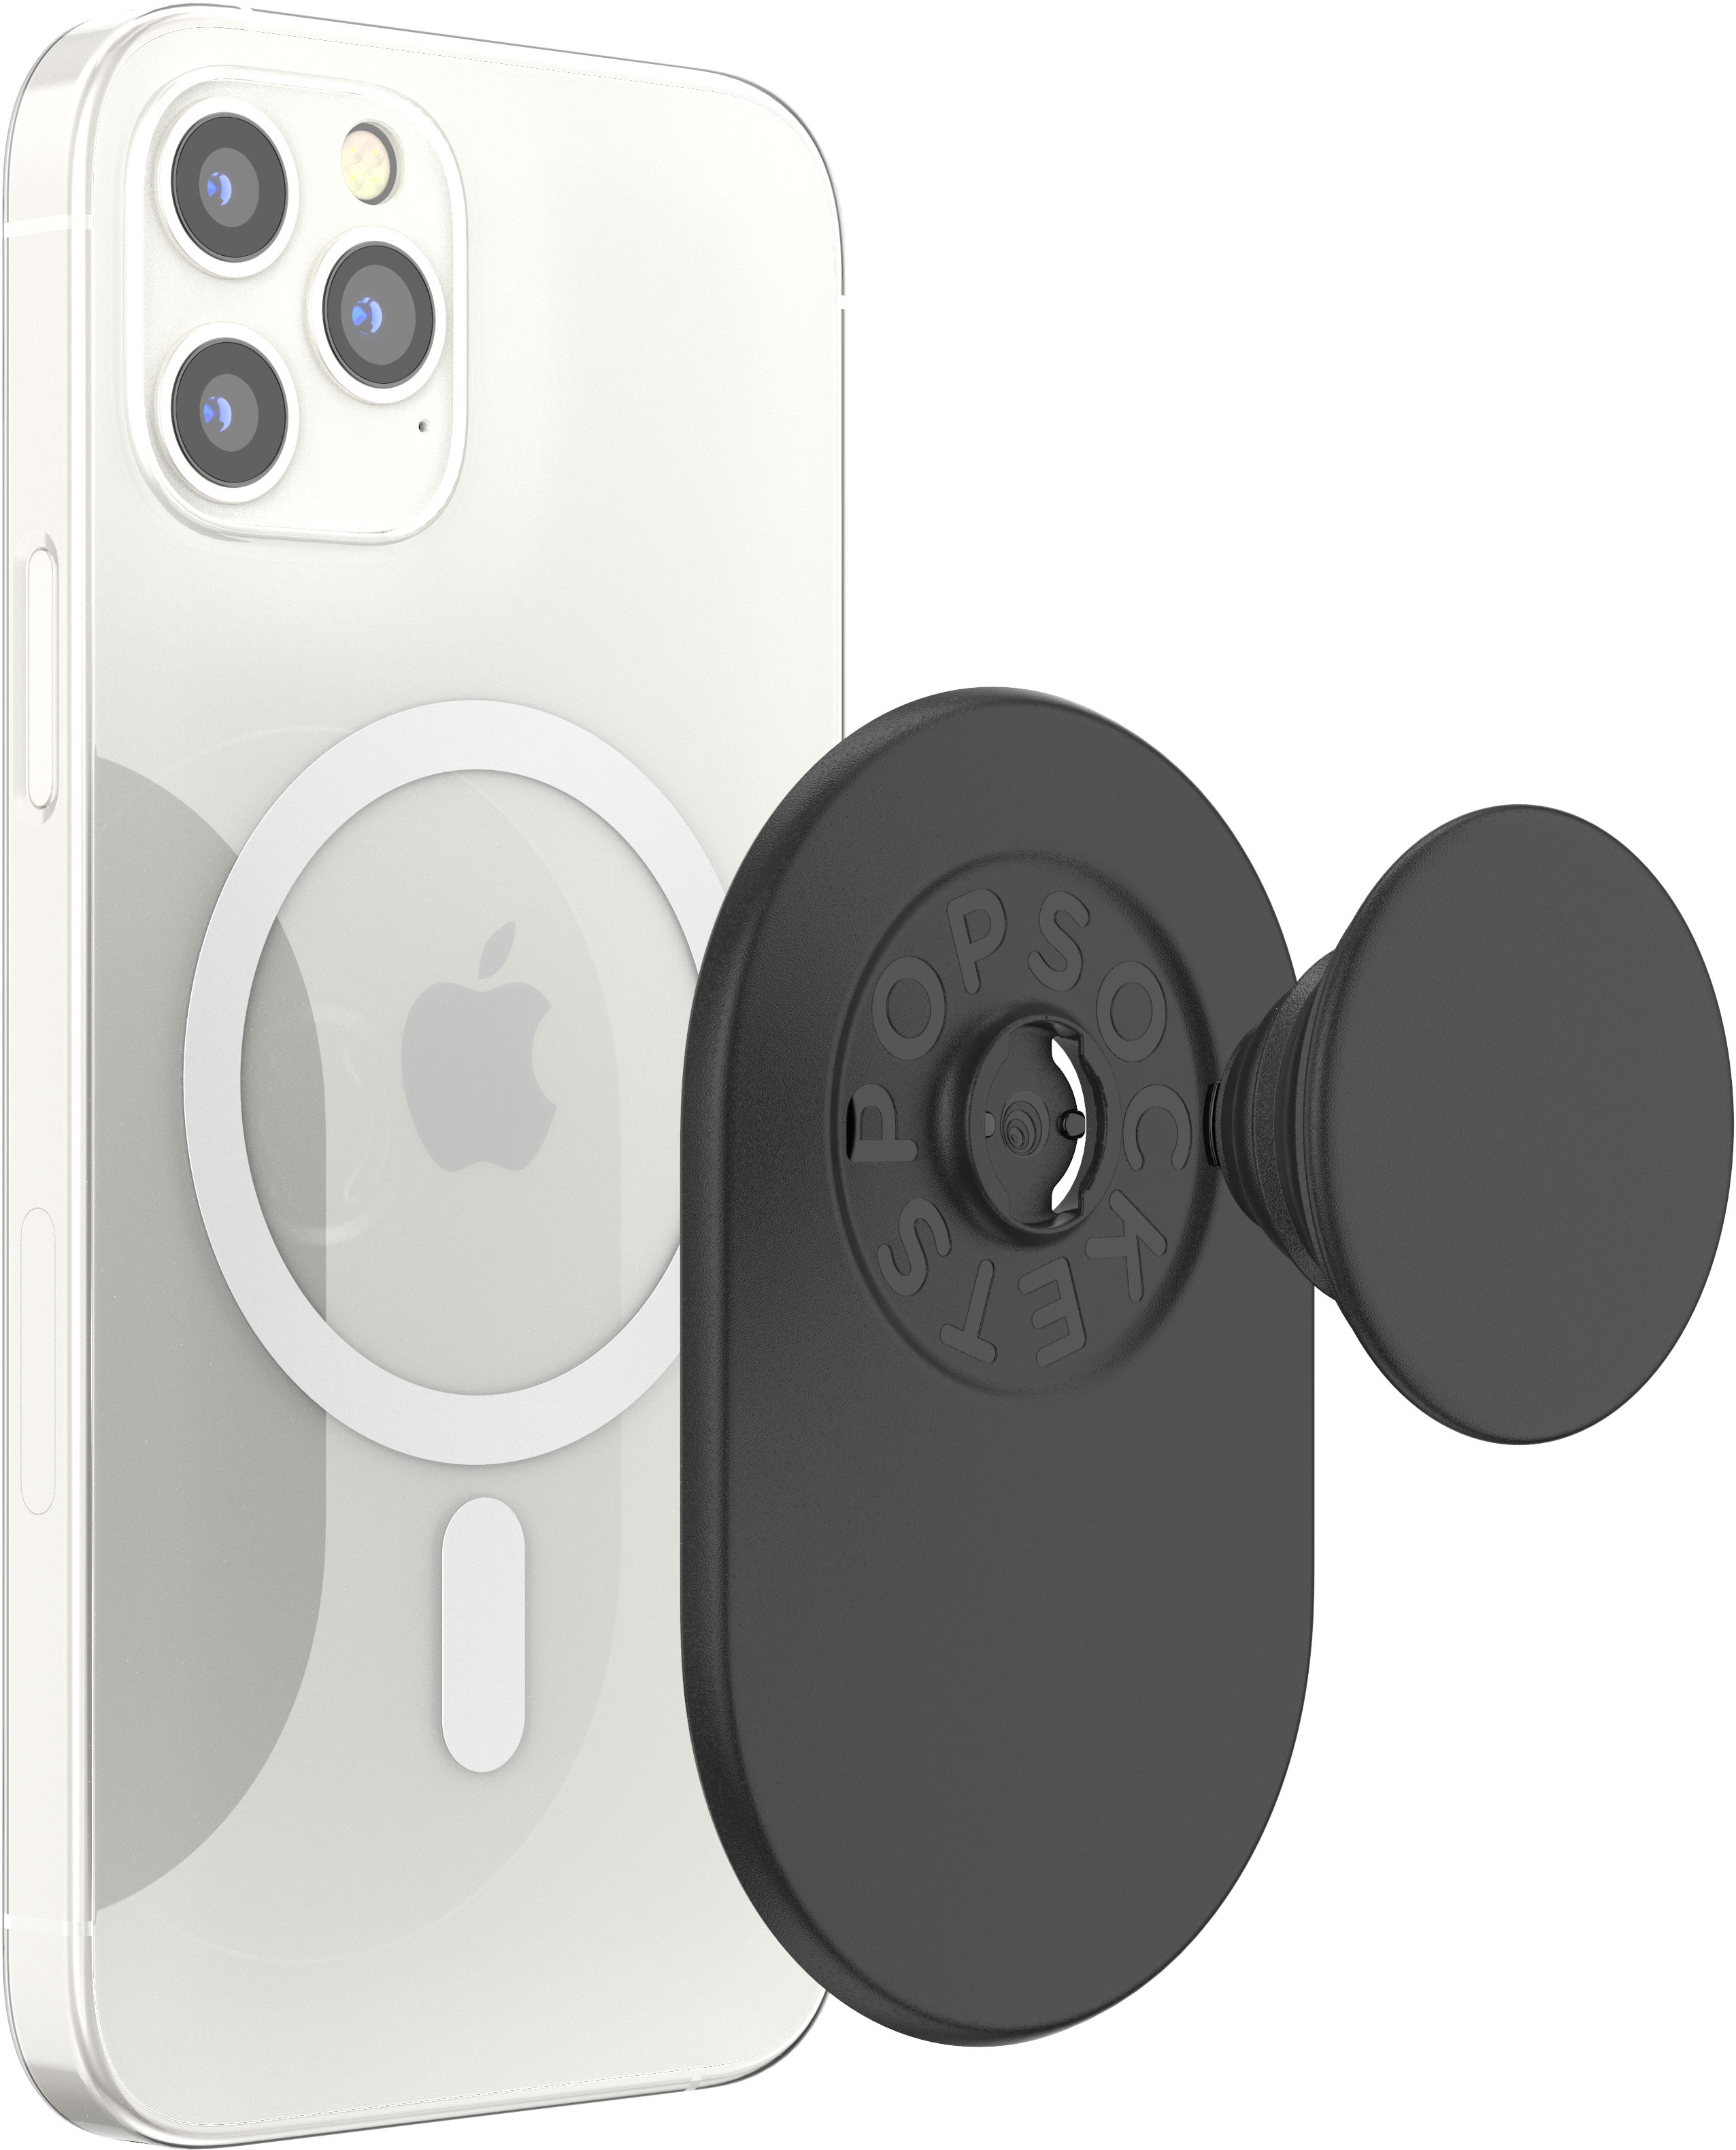 PopSockets PopGrip for MagSafe is on sale for Black Friday